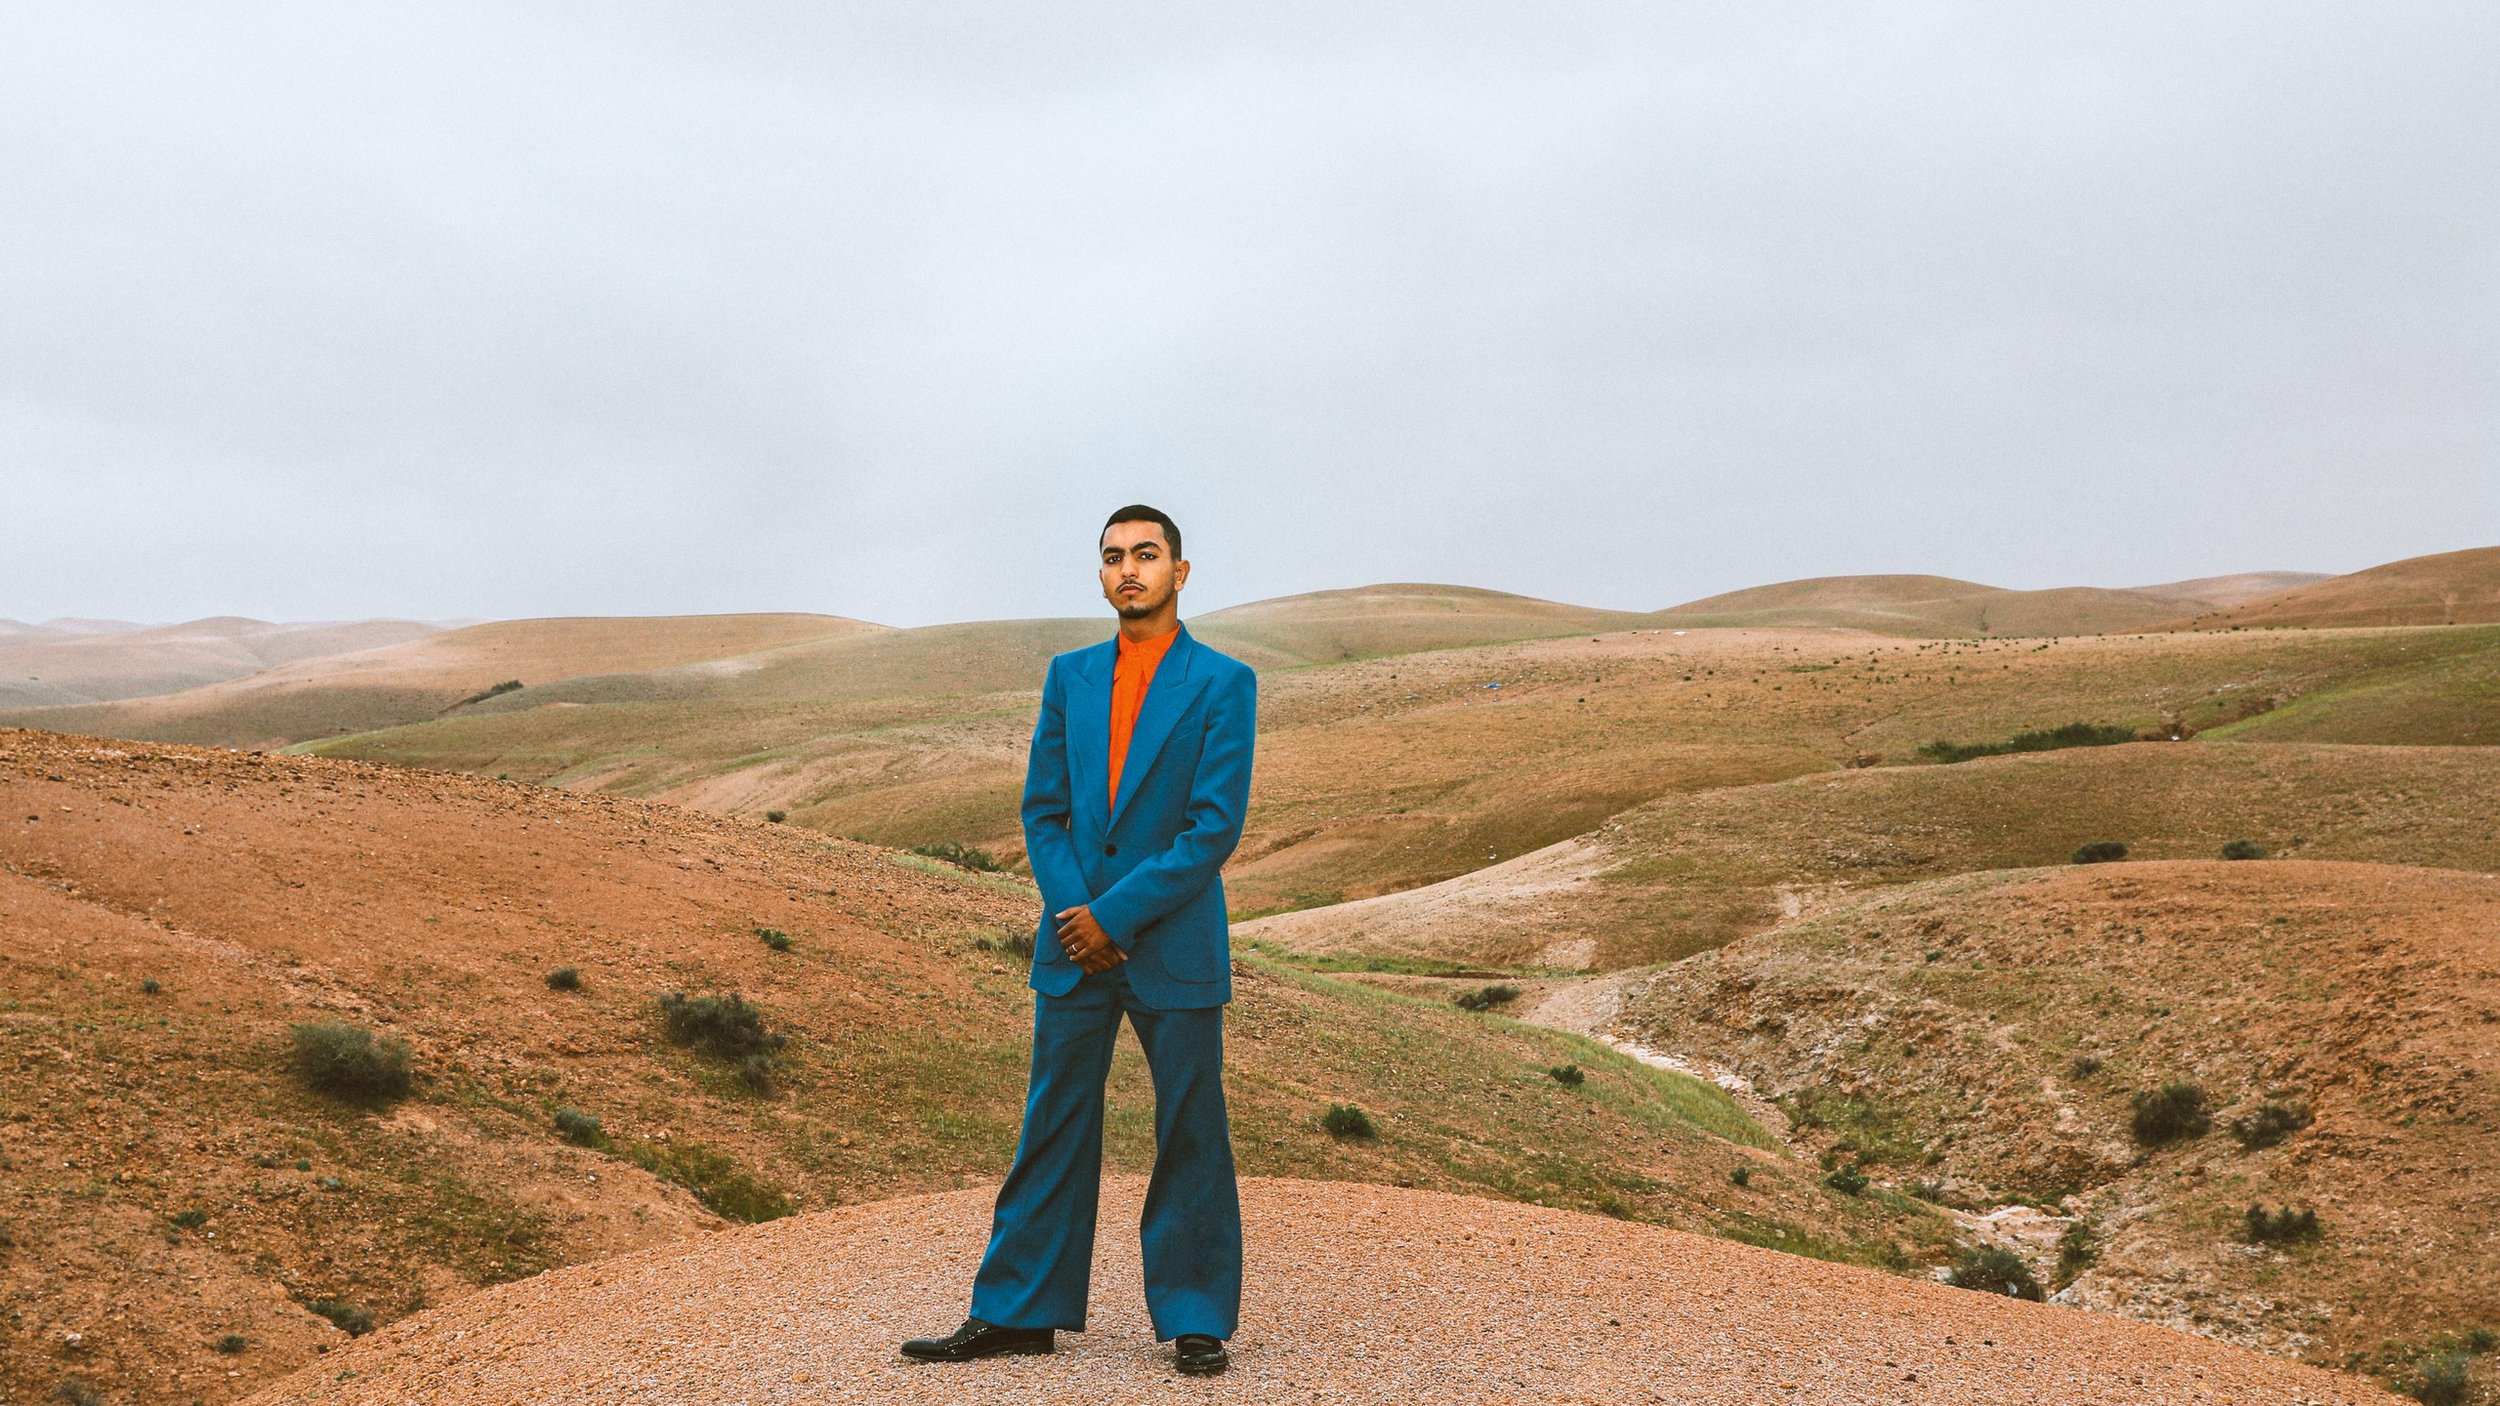 40-hours-in-morocco-gqstyle-fall-01.jpg